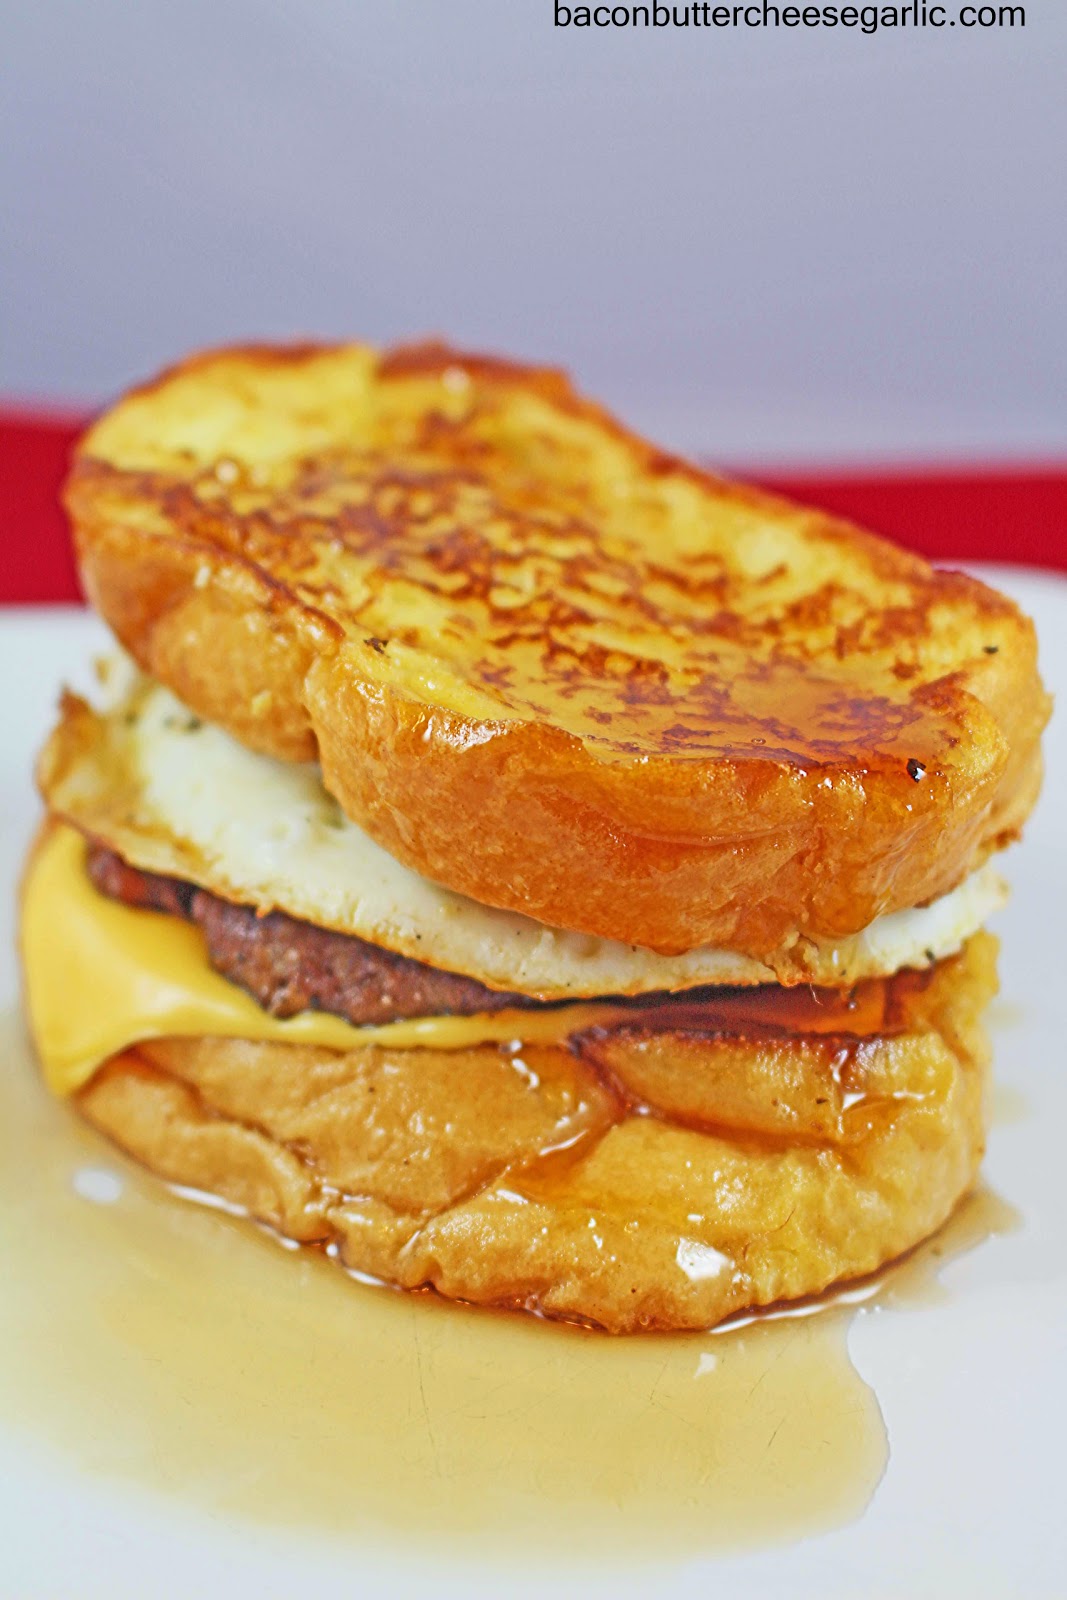 Bacon, Butter, Cheese &amp; Garlic: French Toast Sandwiches